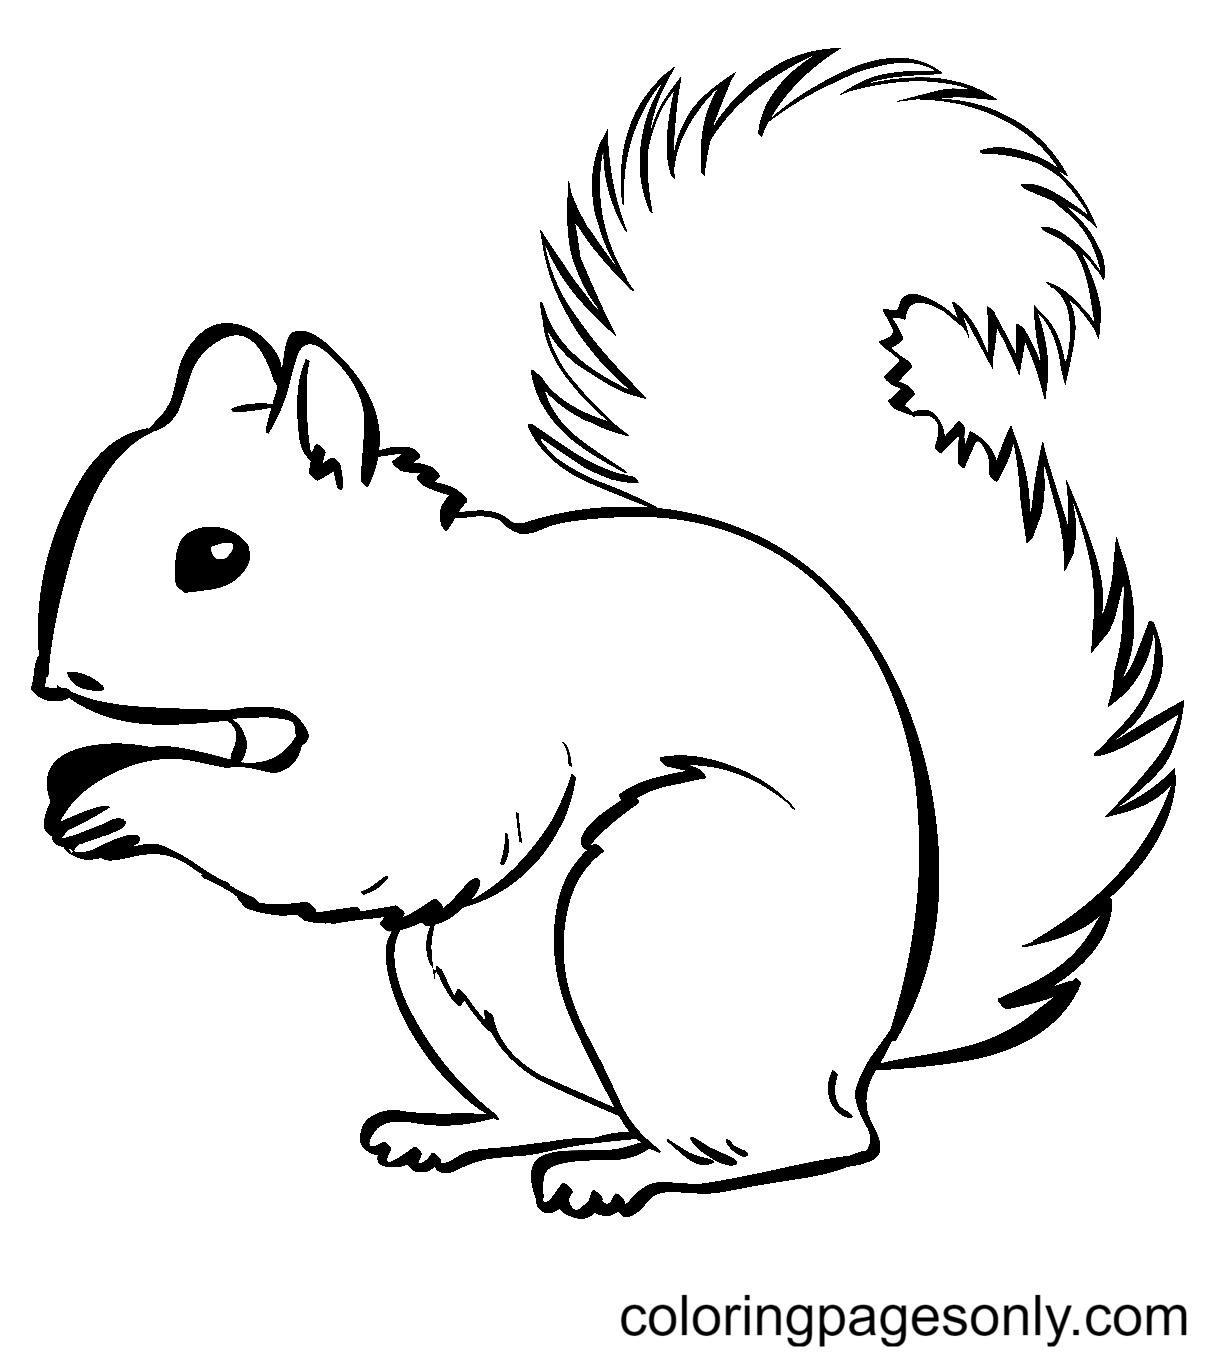 Squirrel Free Coloring Pages